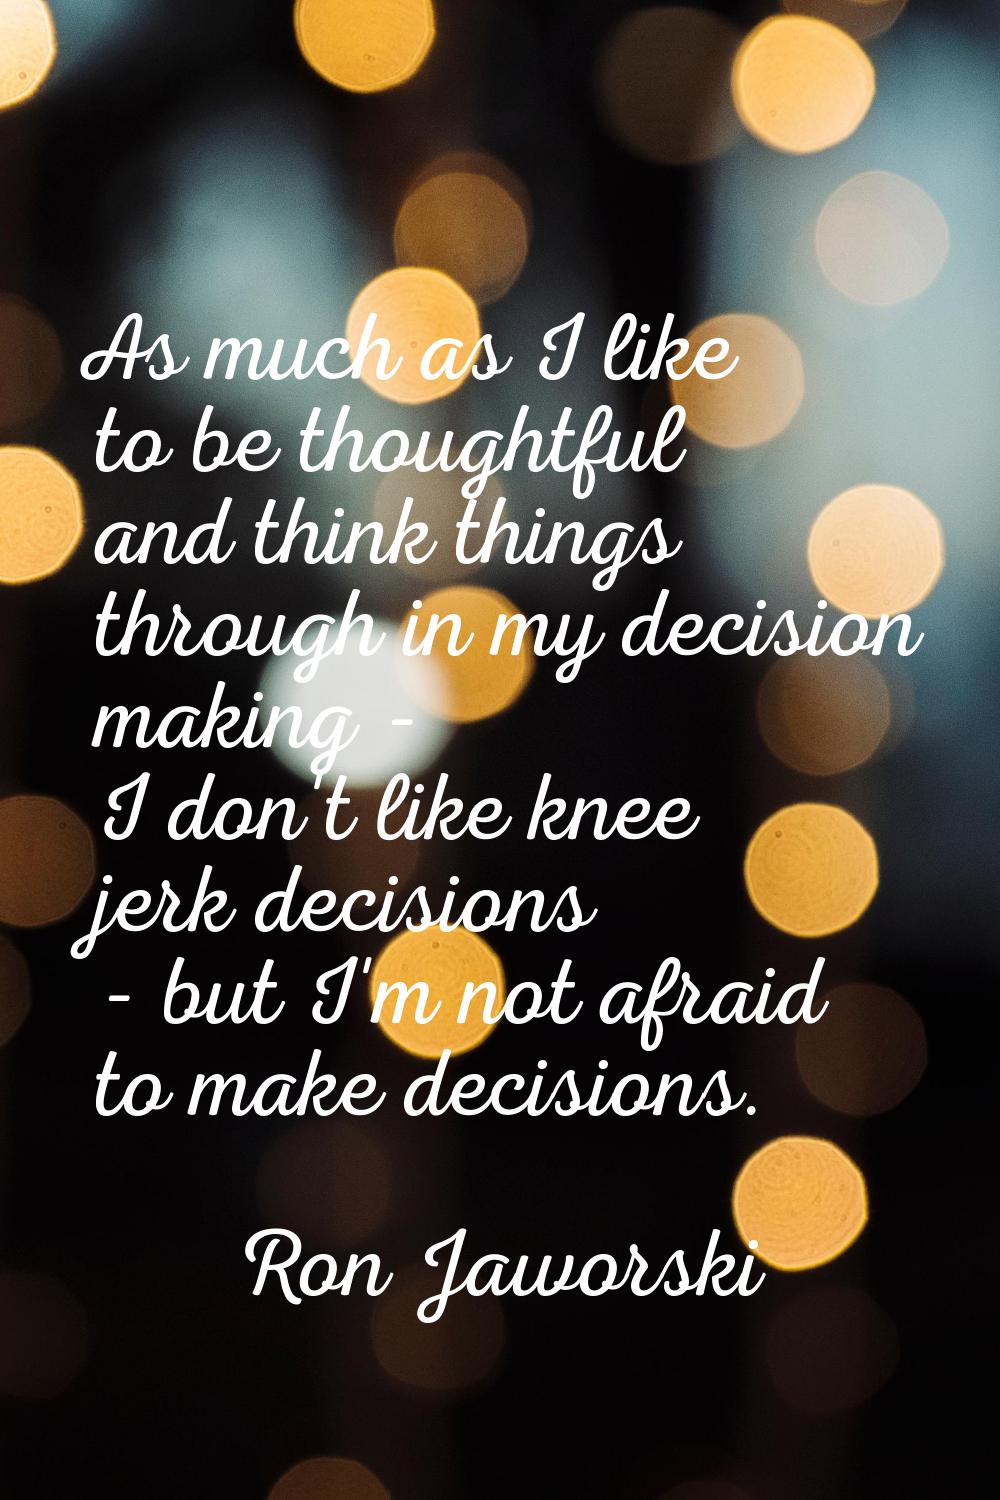 As much as I like to be thoughtful and think things through in my decision making - I don't like kn